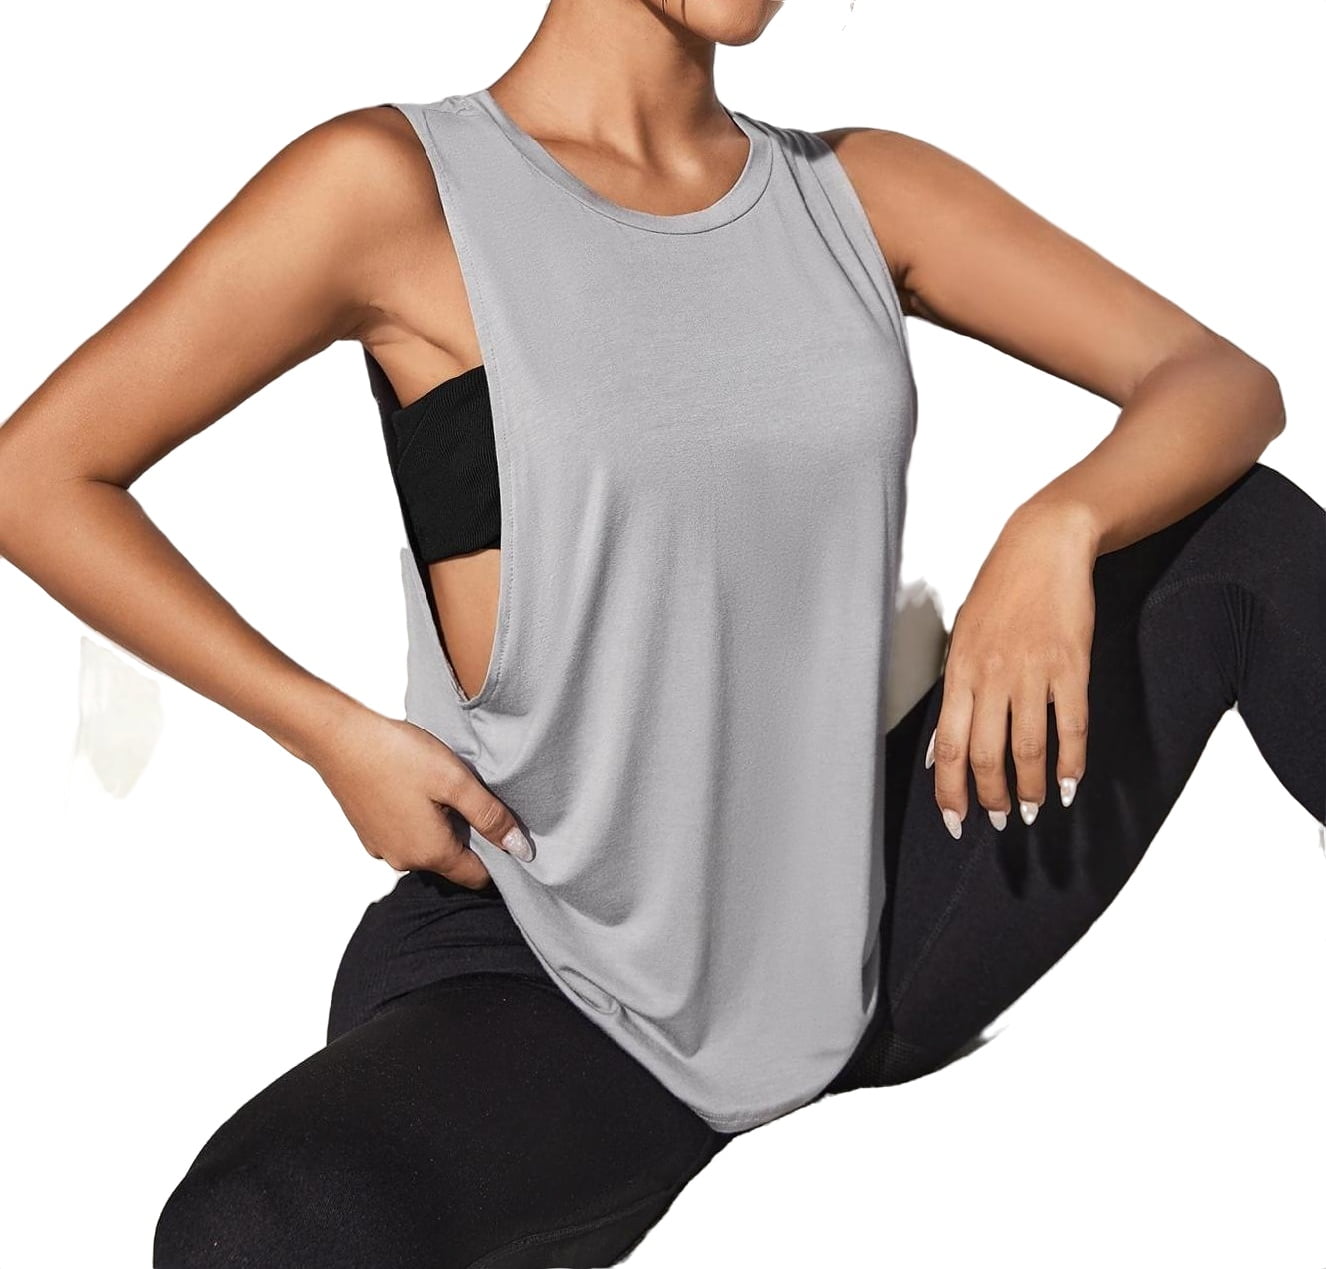 Women's Workout Shirts & Tops - Loose Fit